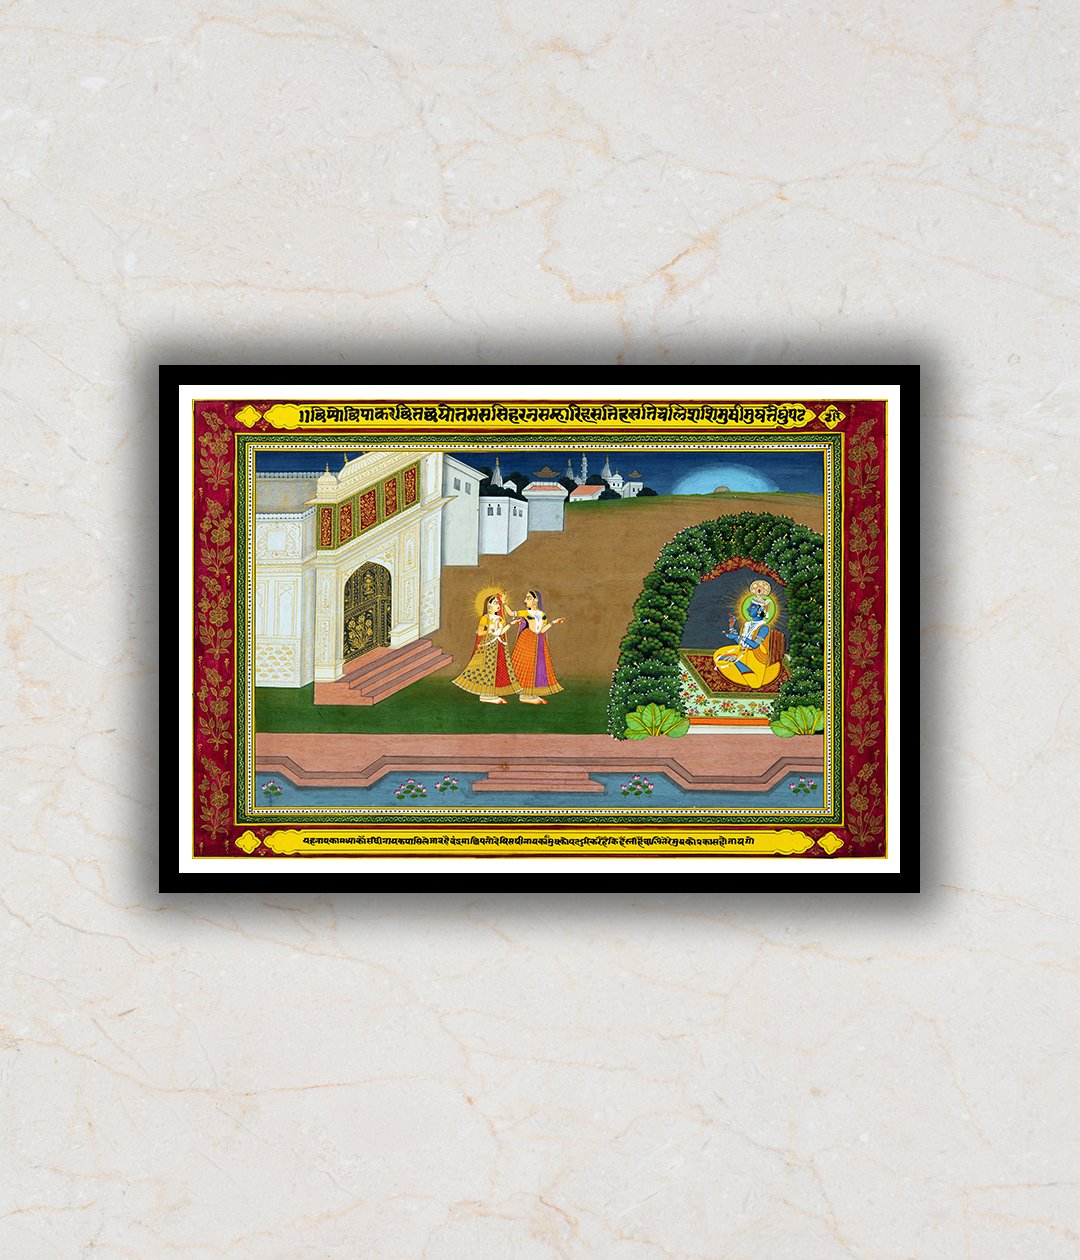 Taking Radha to Krishna Classical Indian Art Painting For Home Wall Art Decor